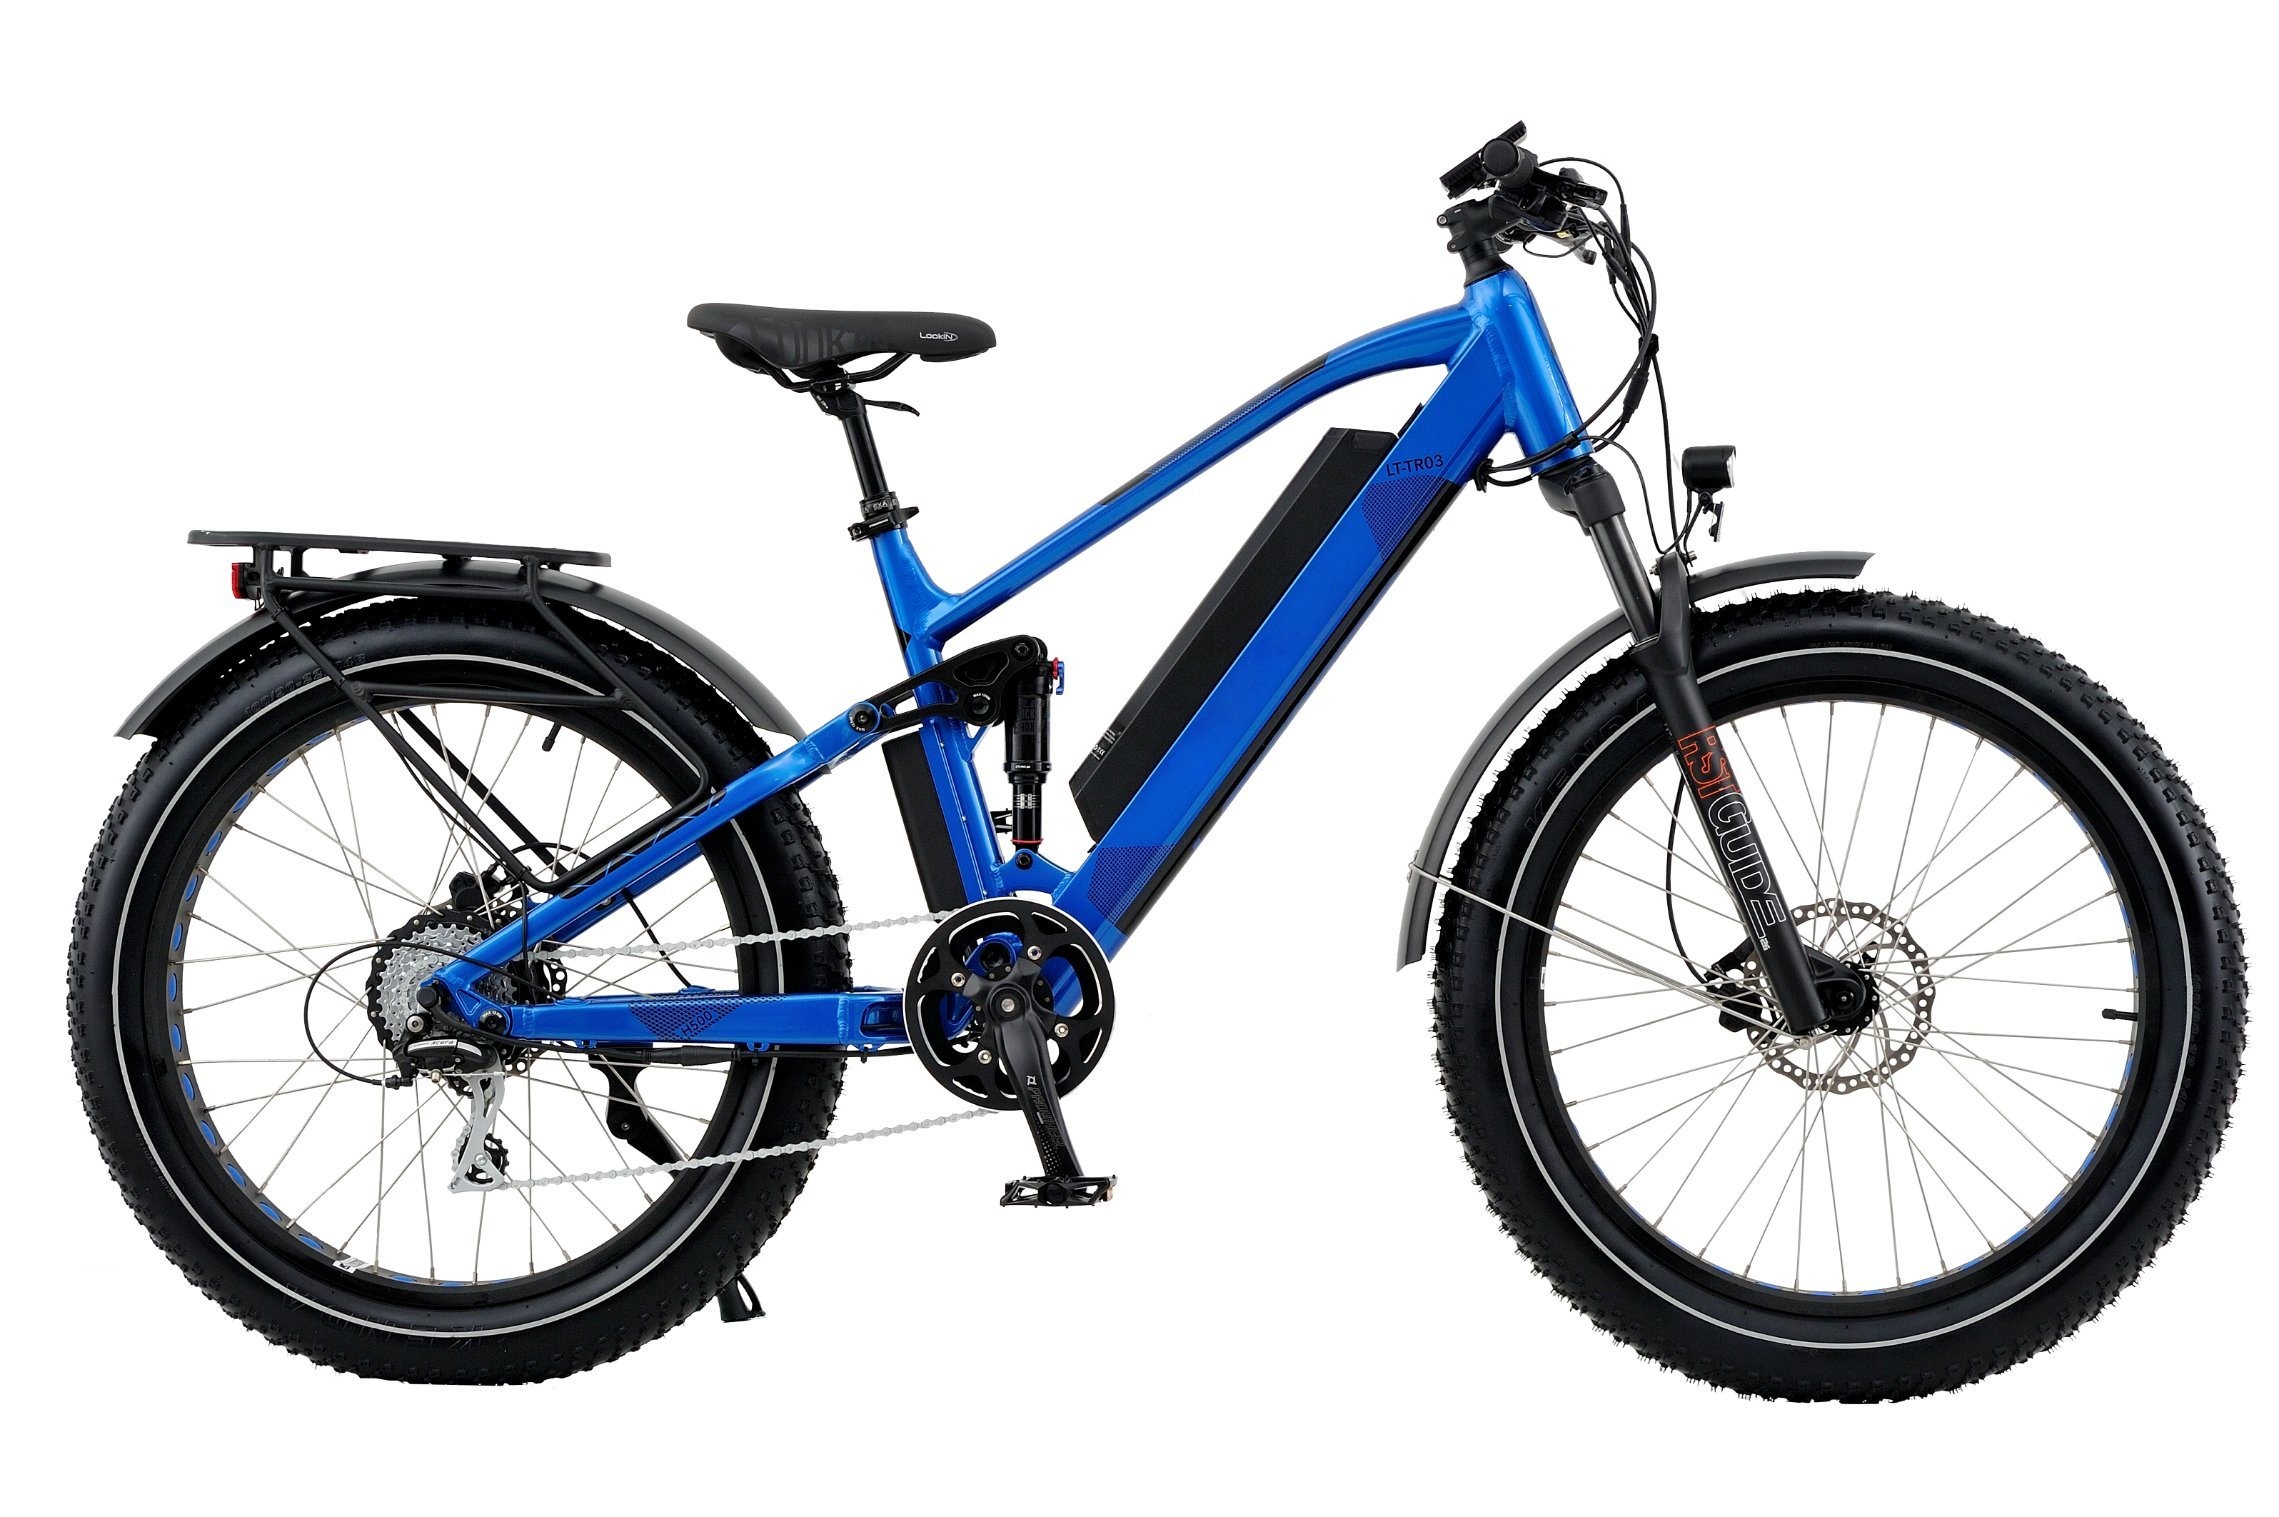 500W 750W 48V 16ah Electric City Bike with Suspension and Li-ion Battery